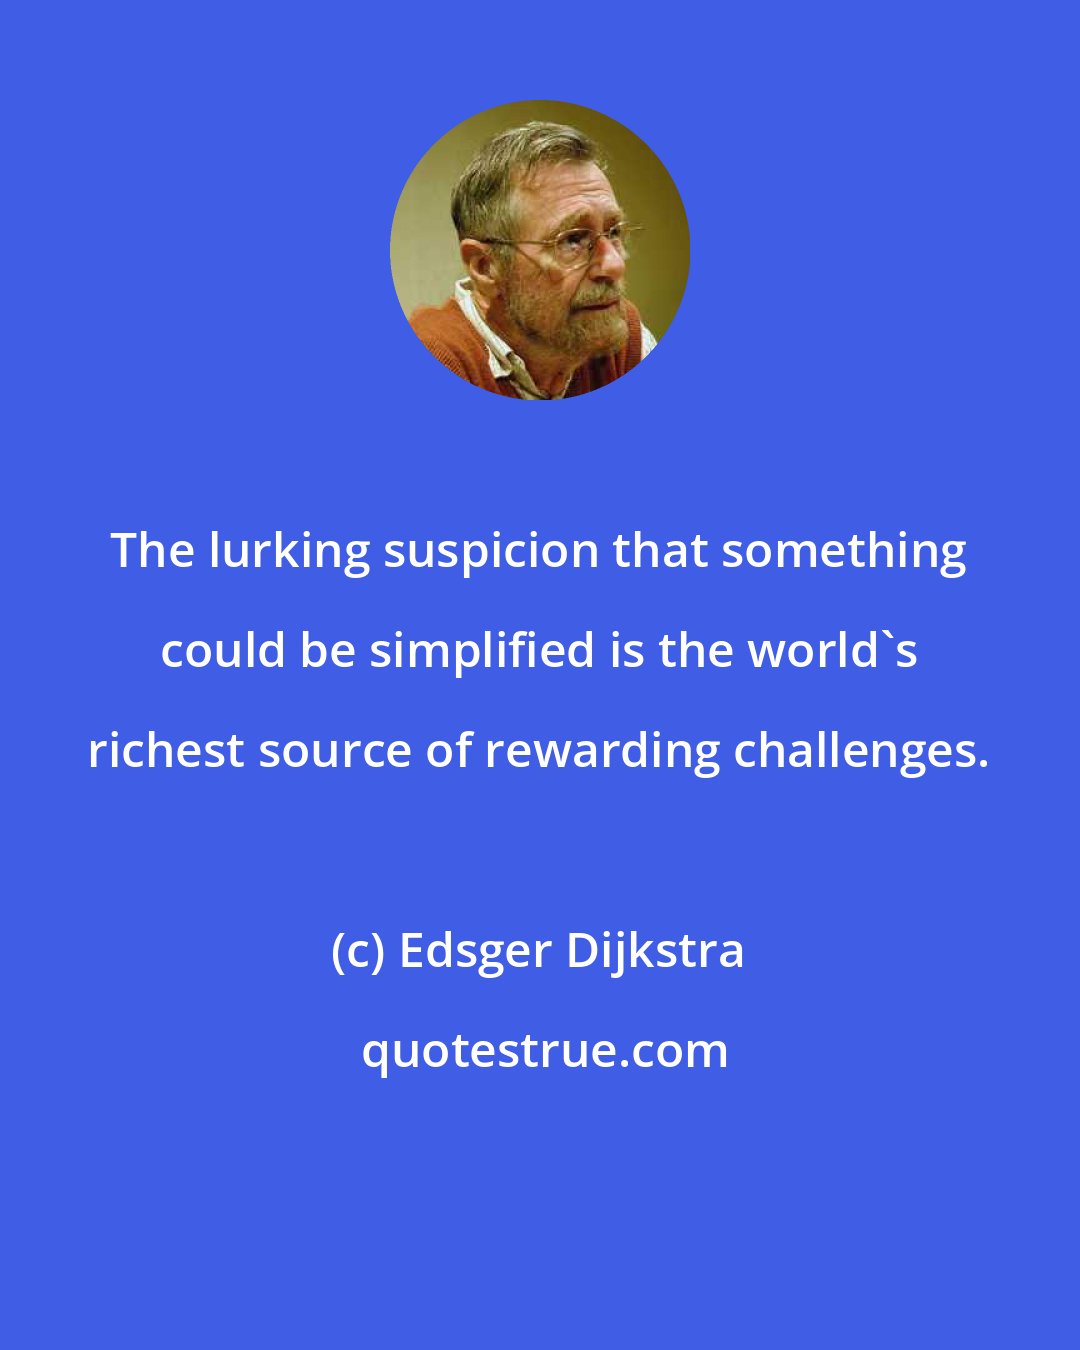 Edsger Dijkstra: The lurking suspicion that something could be simplified is the world's richest source of rewarding challenges.